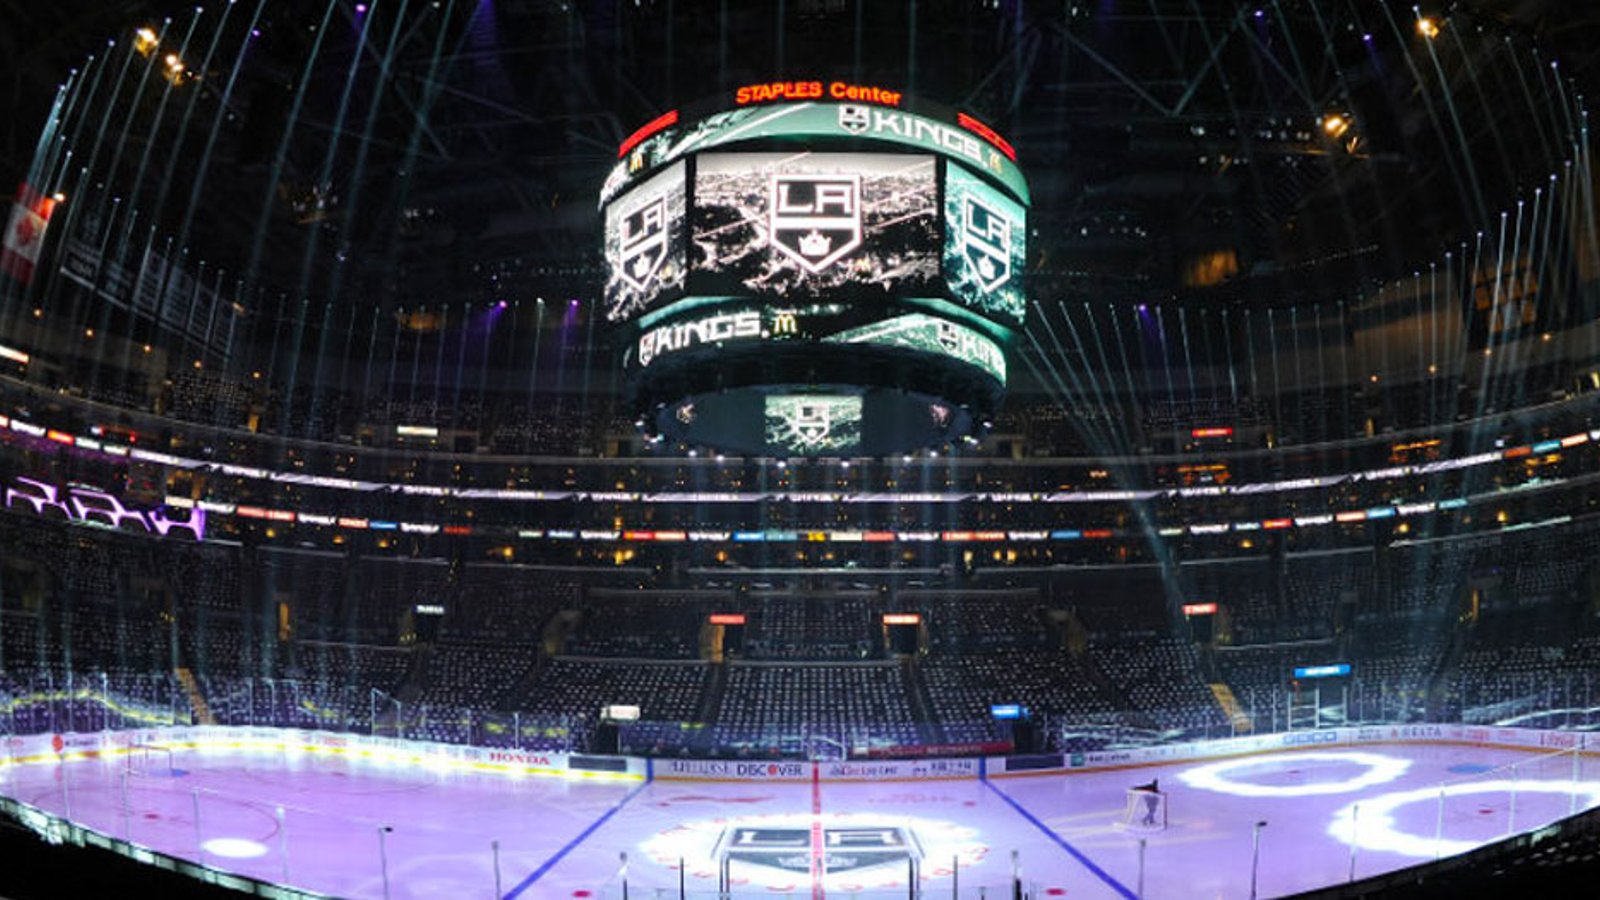 California officially approved to host NHL games